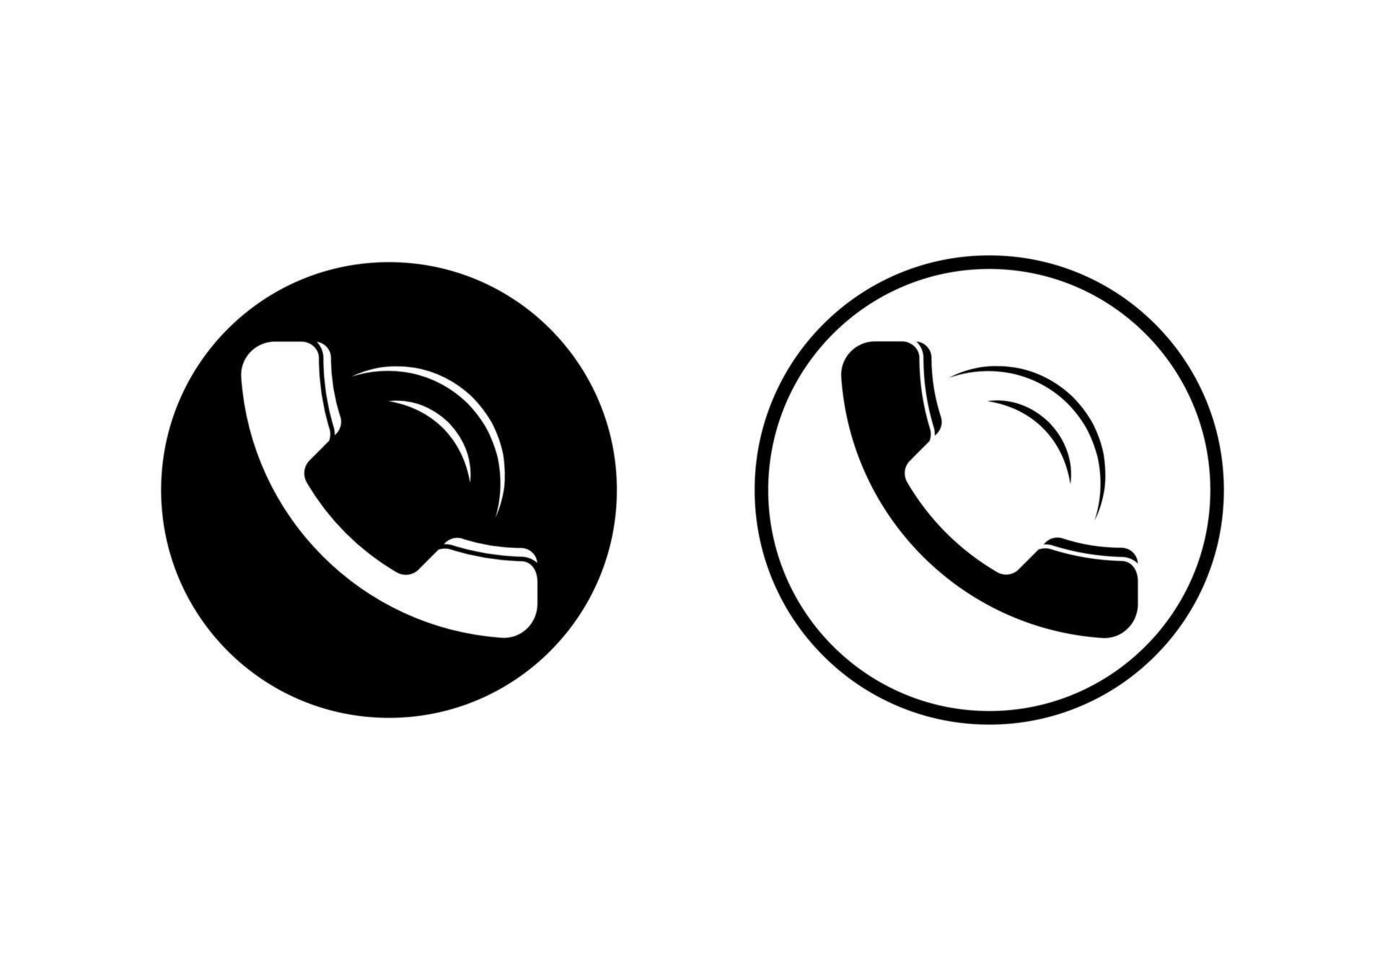 Vector illustration of black and white phone icon isolated on white background